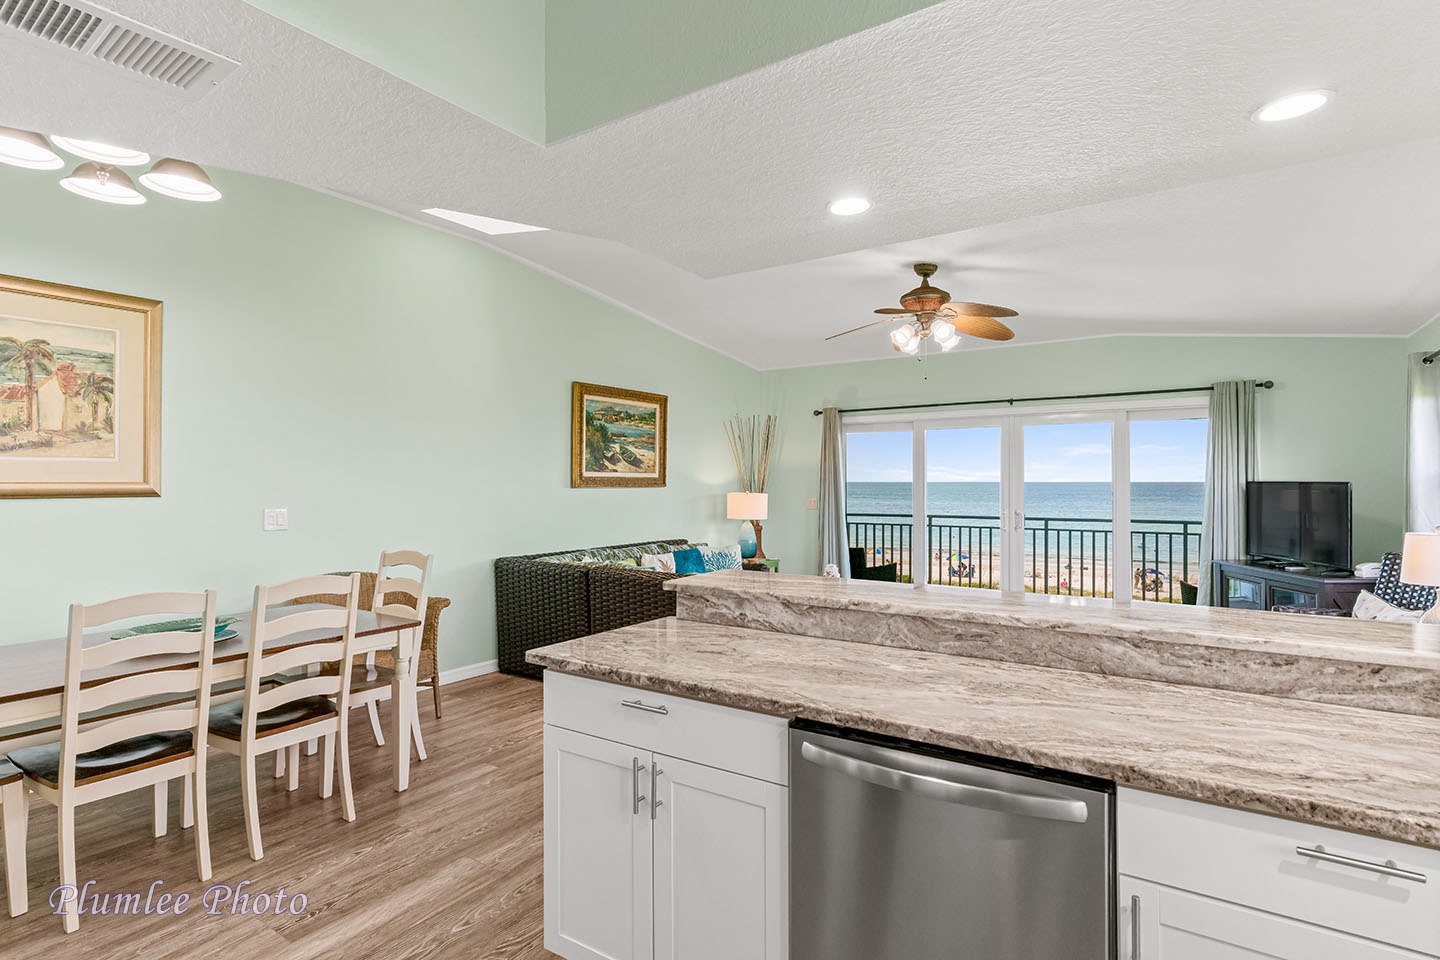 Enjoy the view of beach while preparing meals.